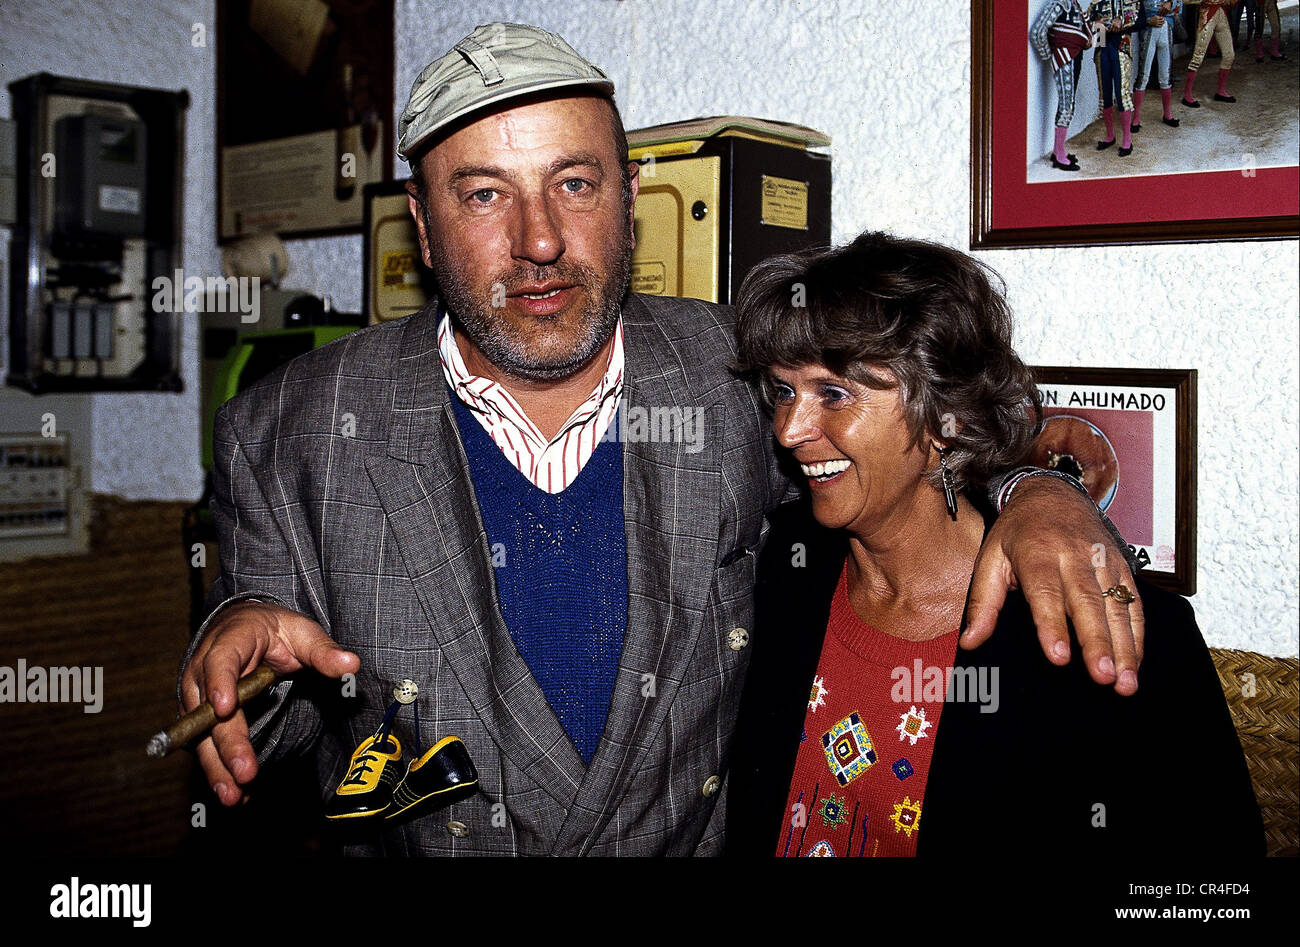 Krug, Manfred, 8.2.1937 - 21.10.2016, German actor, half length, at his birthday party, 1990, with his wife Liselotte, in Almeria, Spain, Stock Photo